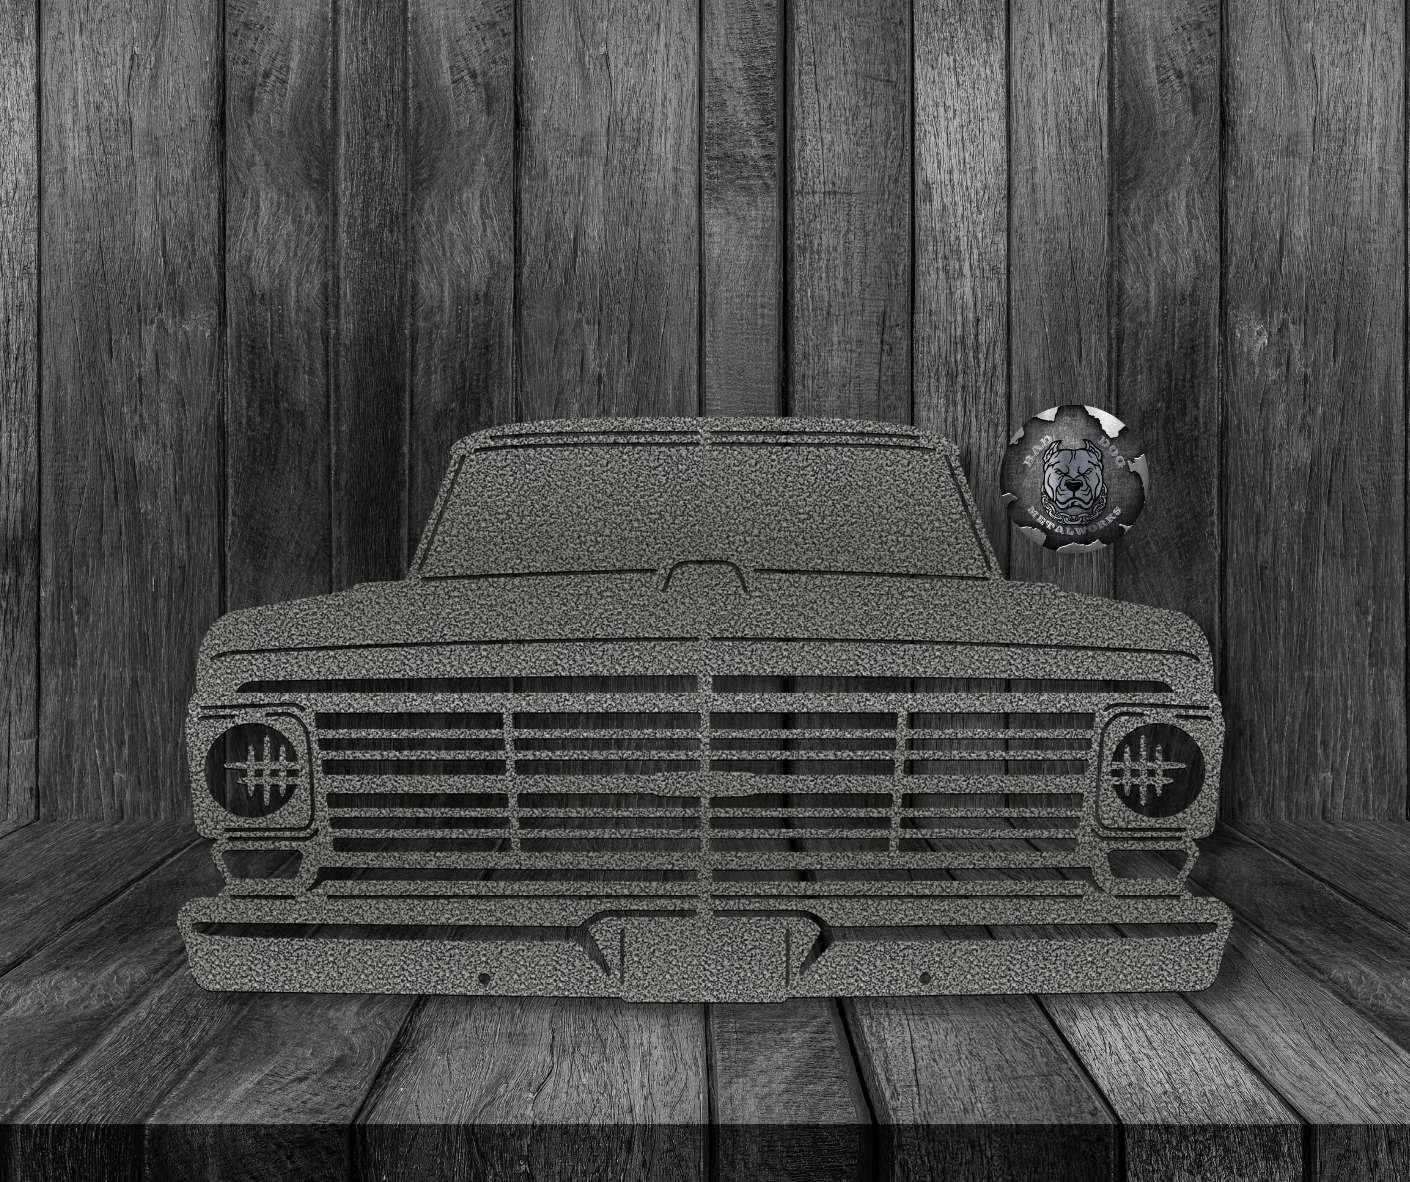 1969 Ford Pickup Truck Front End Metal Art